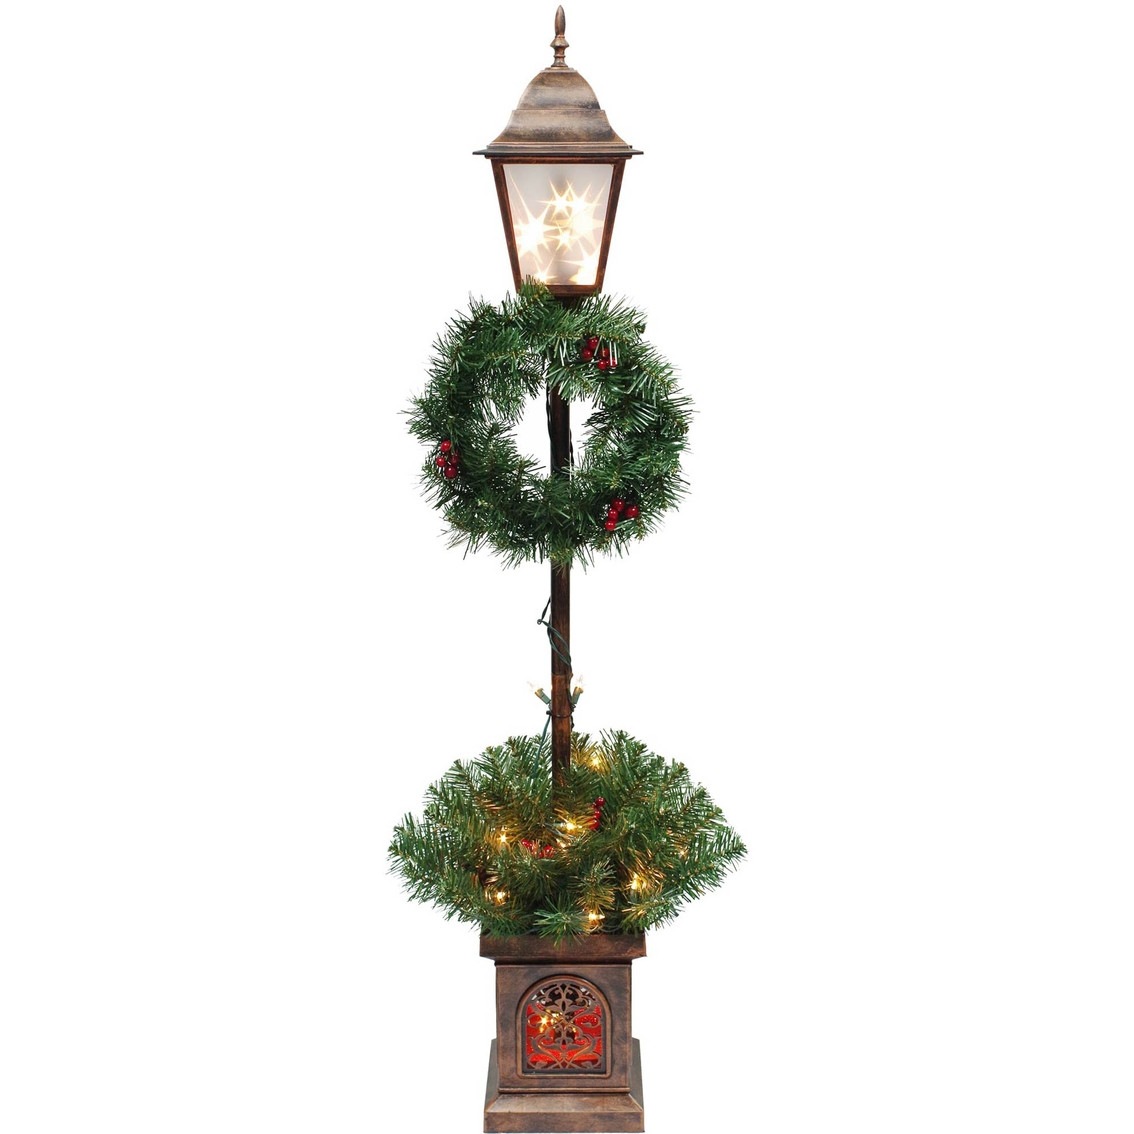 Outdoor Christmas Lamp Post
 Puleo 4 Ft Lighted Plastic Holiday Lamp Post Yard